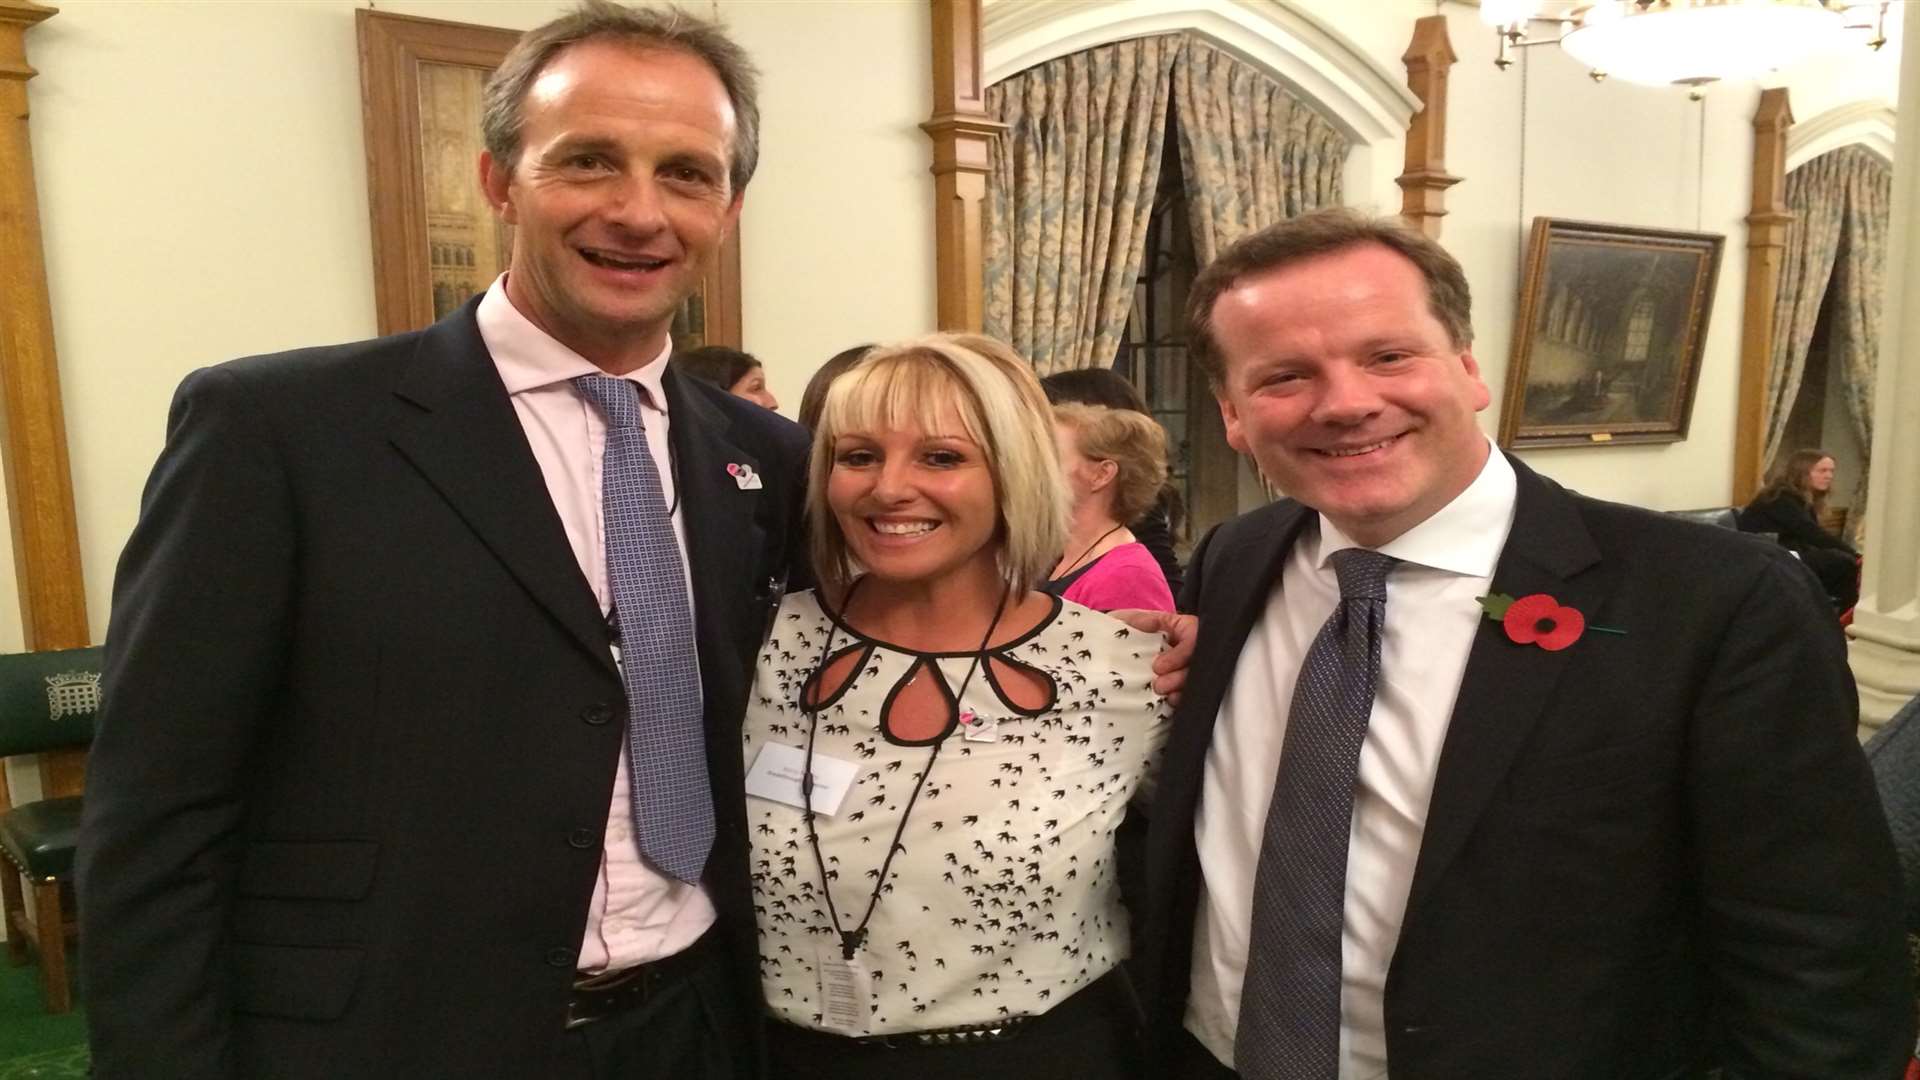 Breakthrough Breast Cancer chief executive Chris Askew, ambassador Kerry Rubins and MP Charlie Elphicke